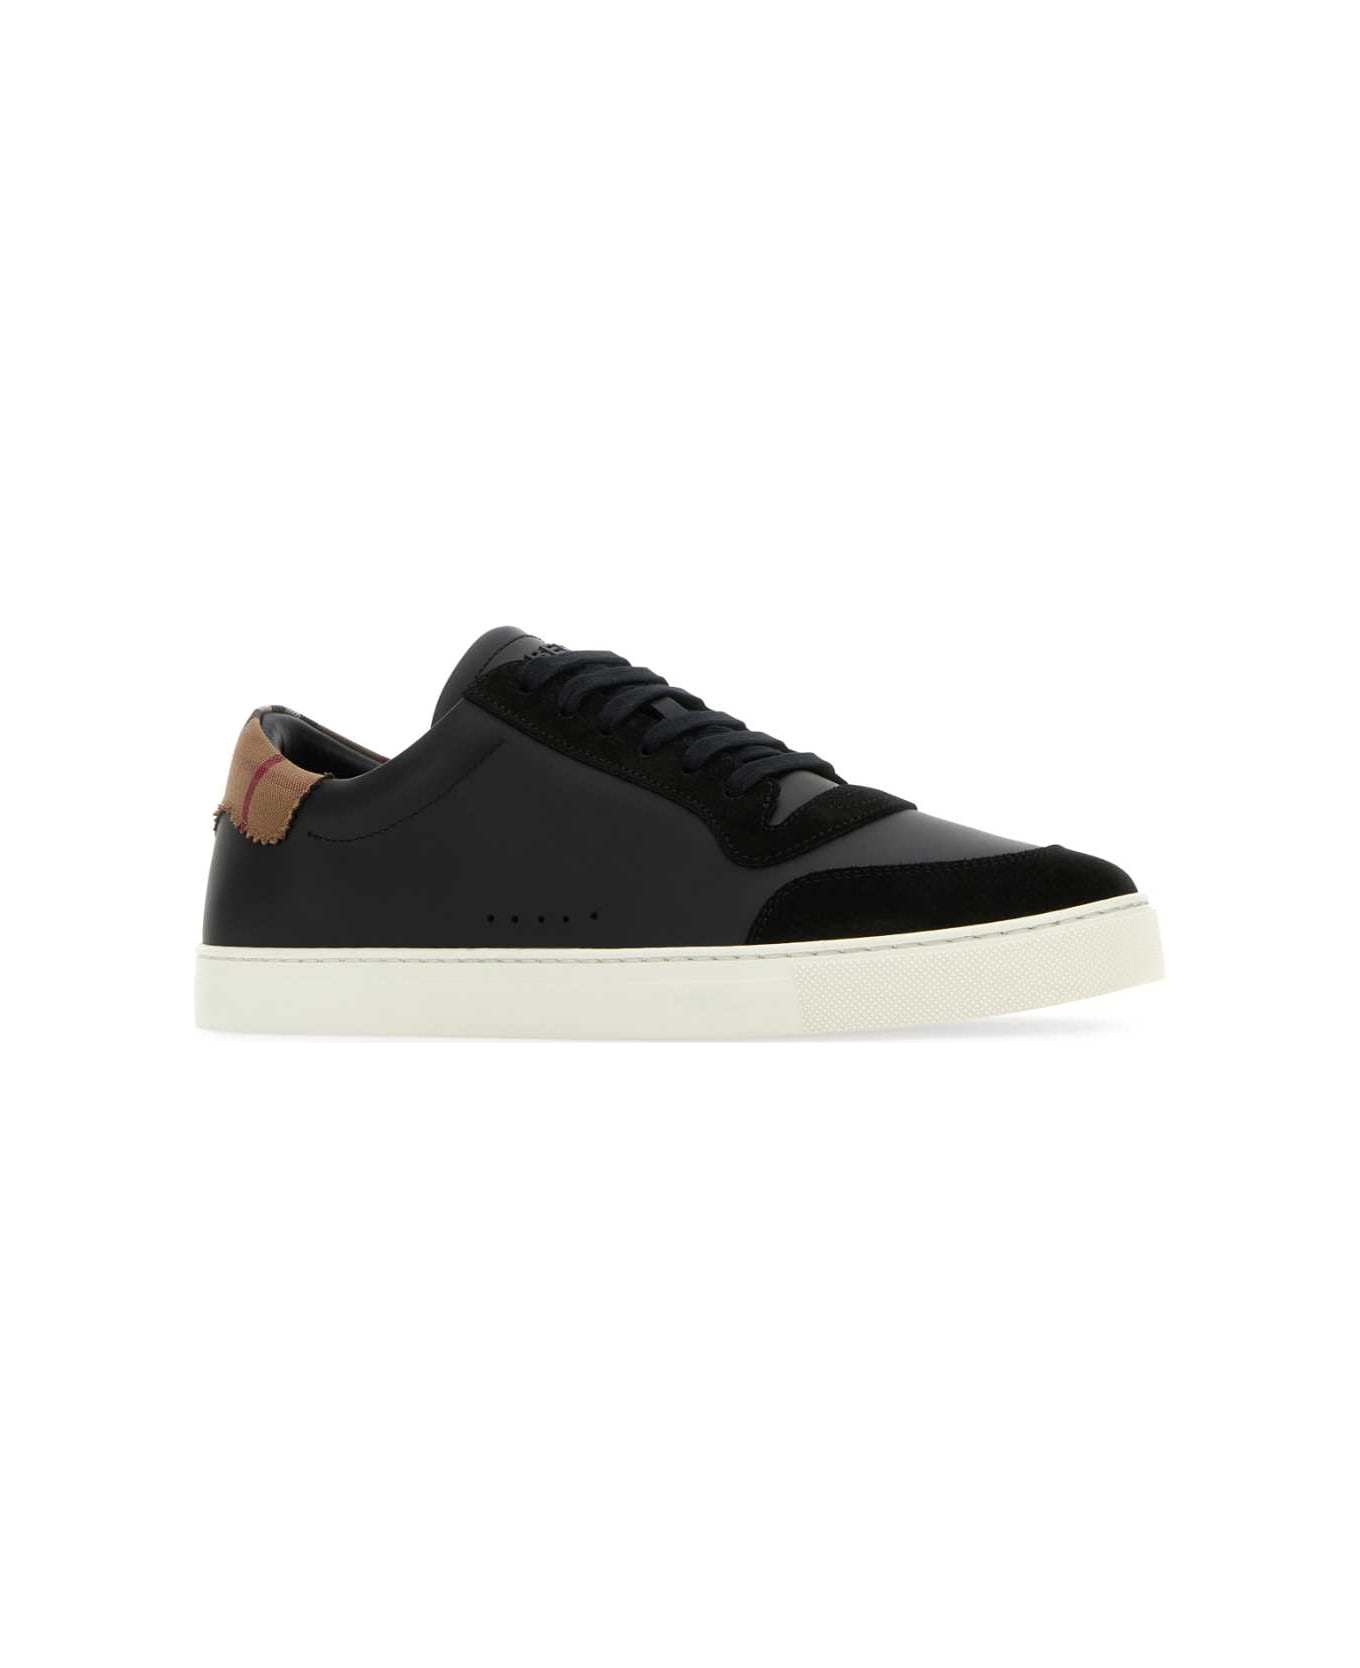 Burberry Black Leather Sneakers - BLACK